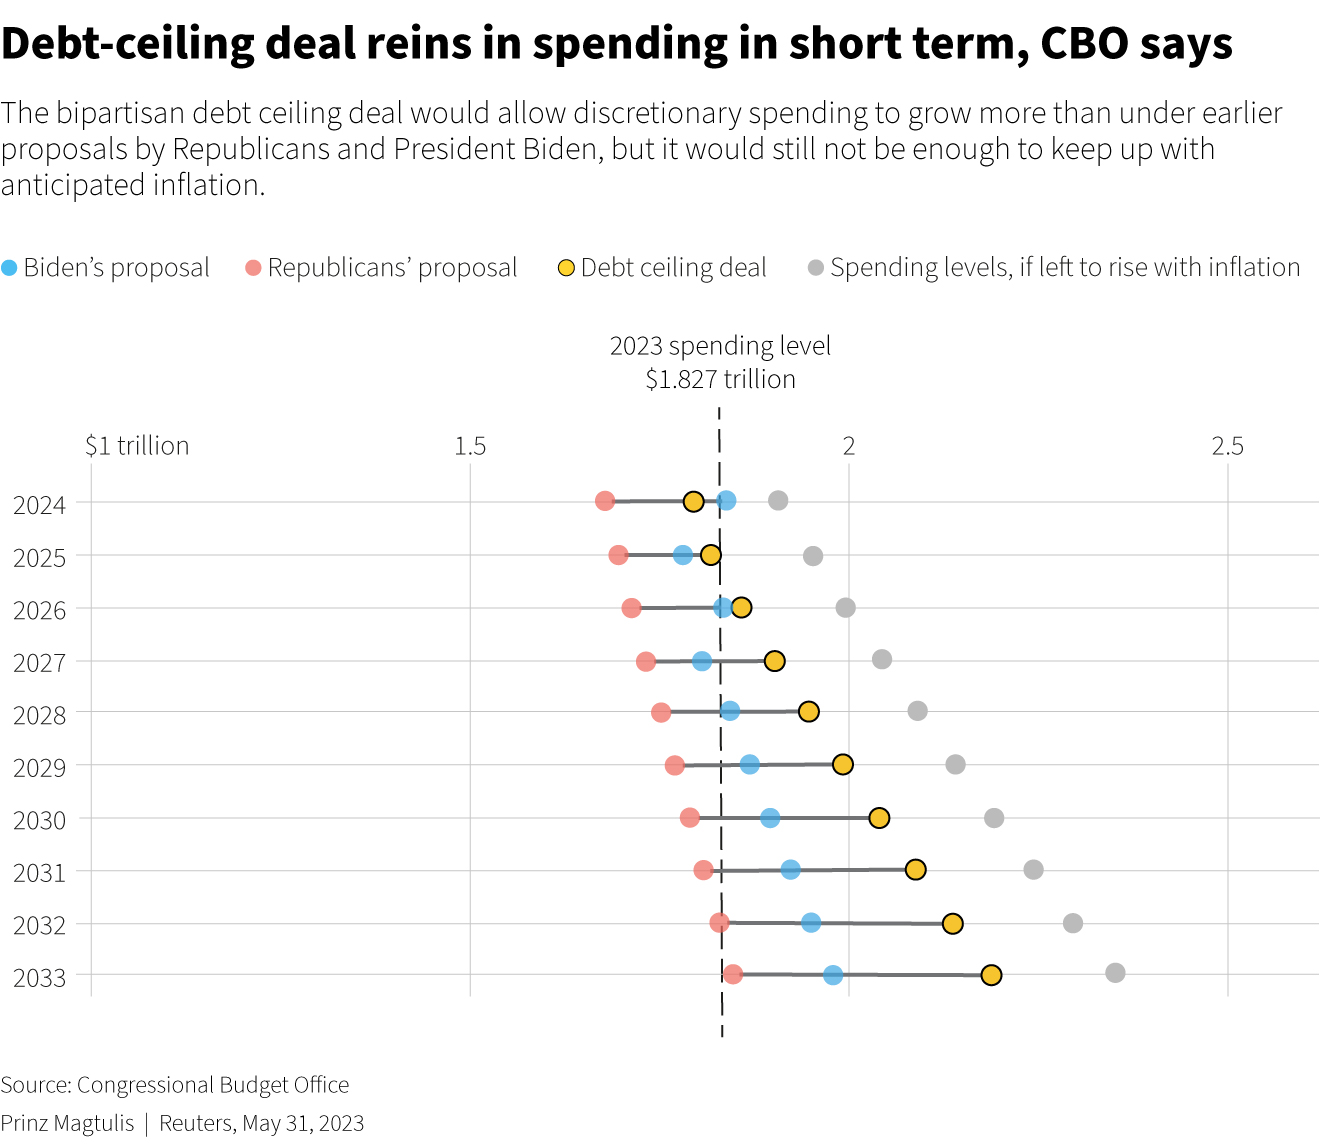 Chart shows savings projected by the Congressional Budget Office on the Democrats's 2024 budge proposal,
                Republicans's version and the debt-ceiling deal.